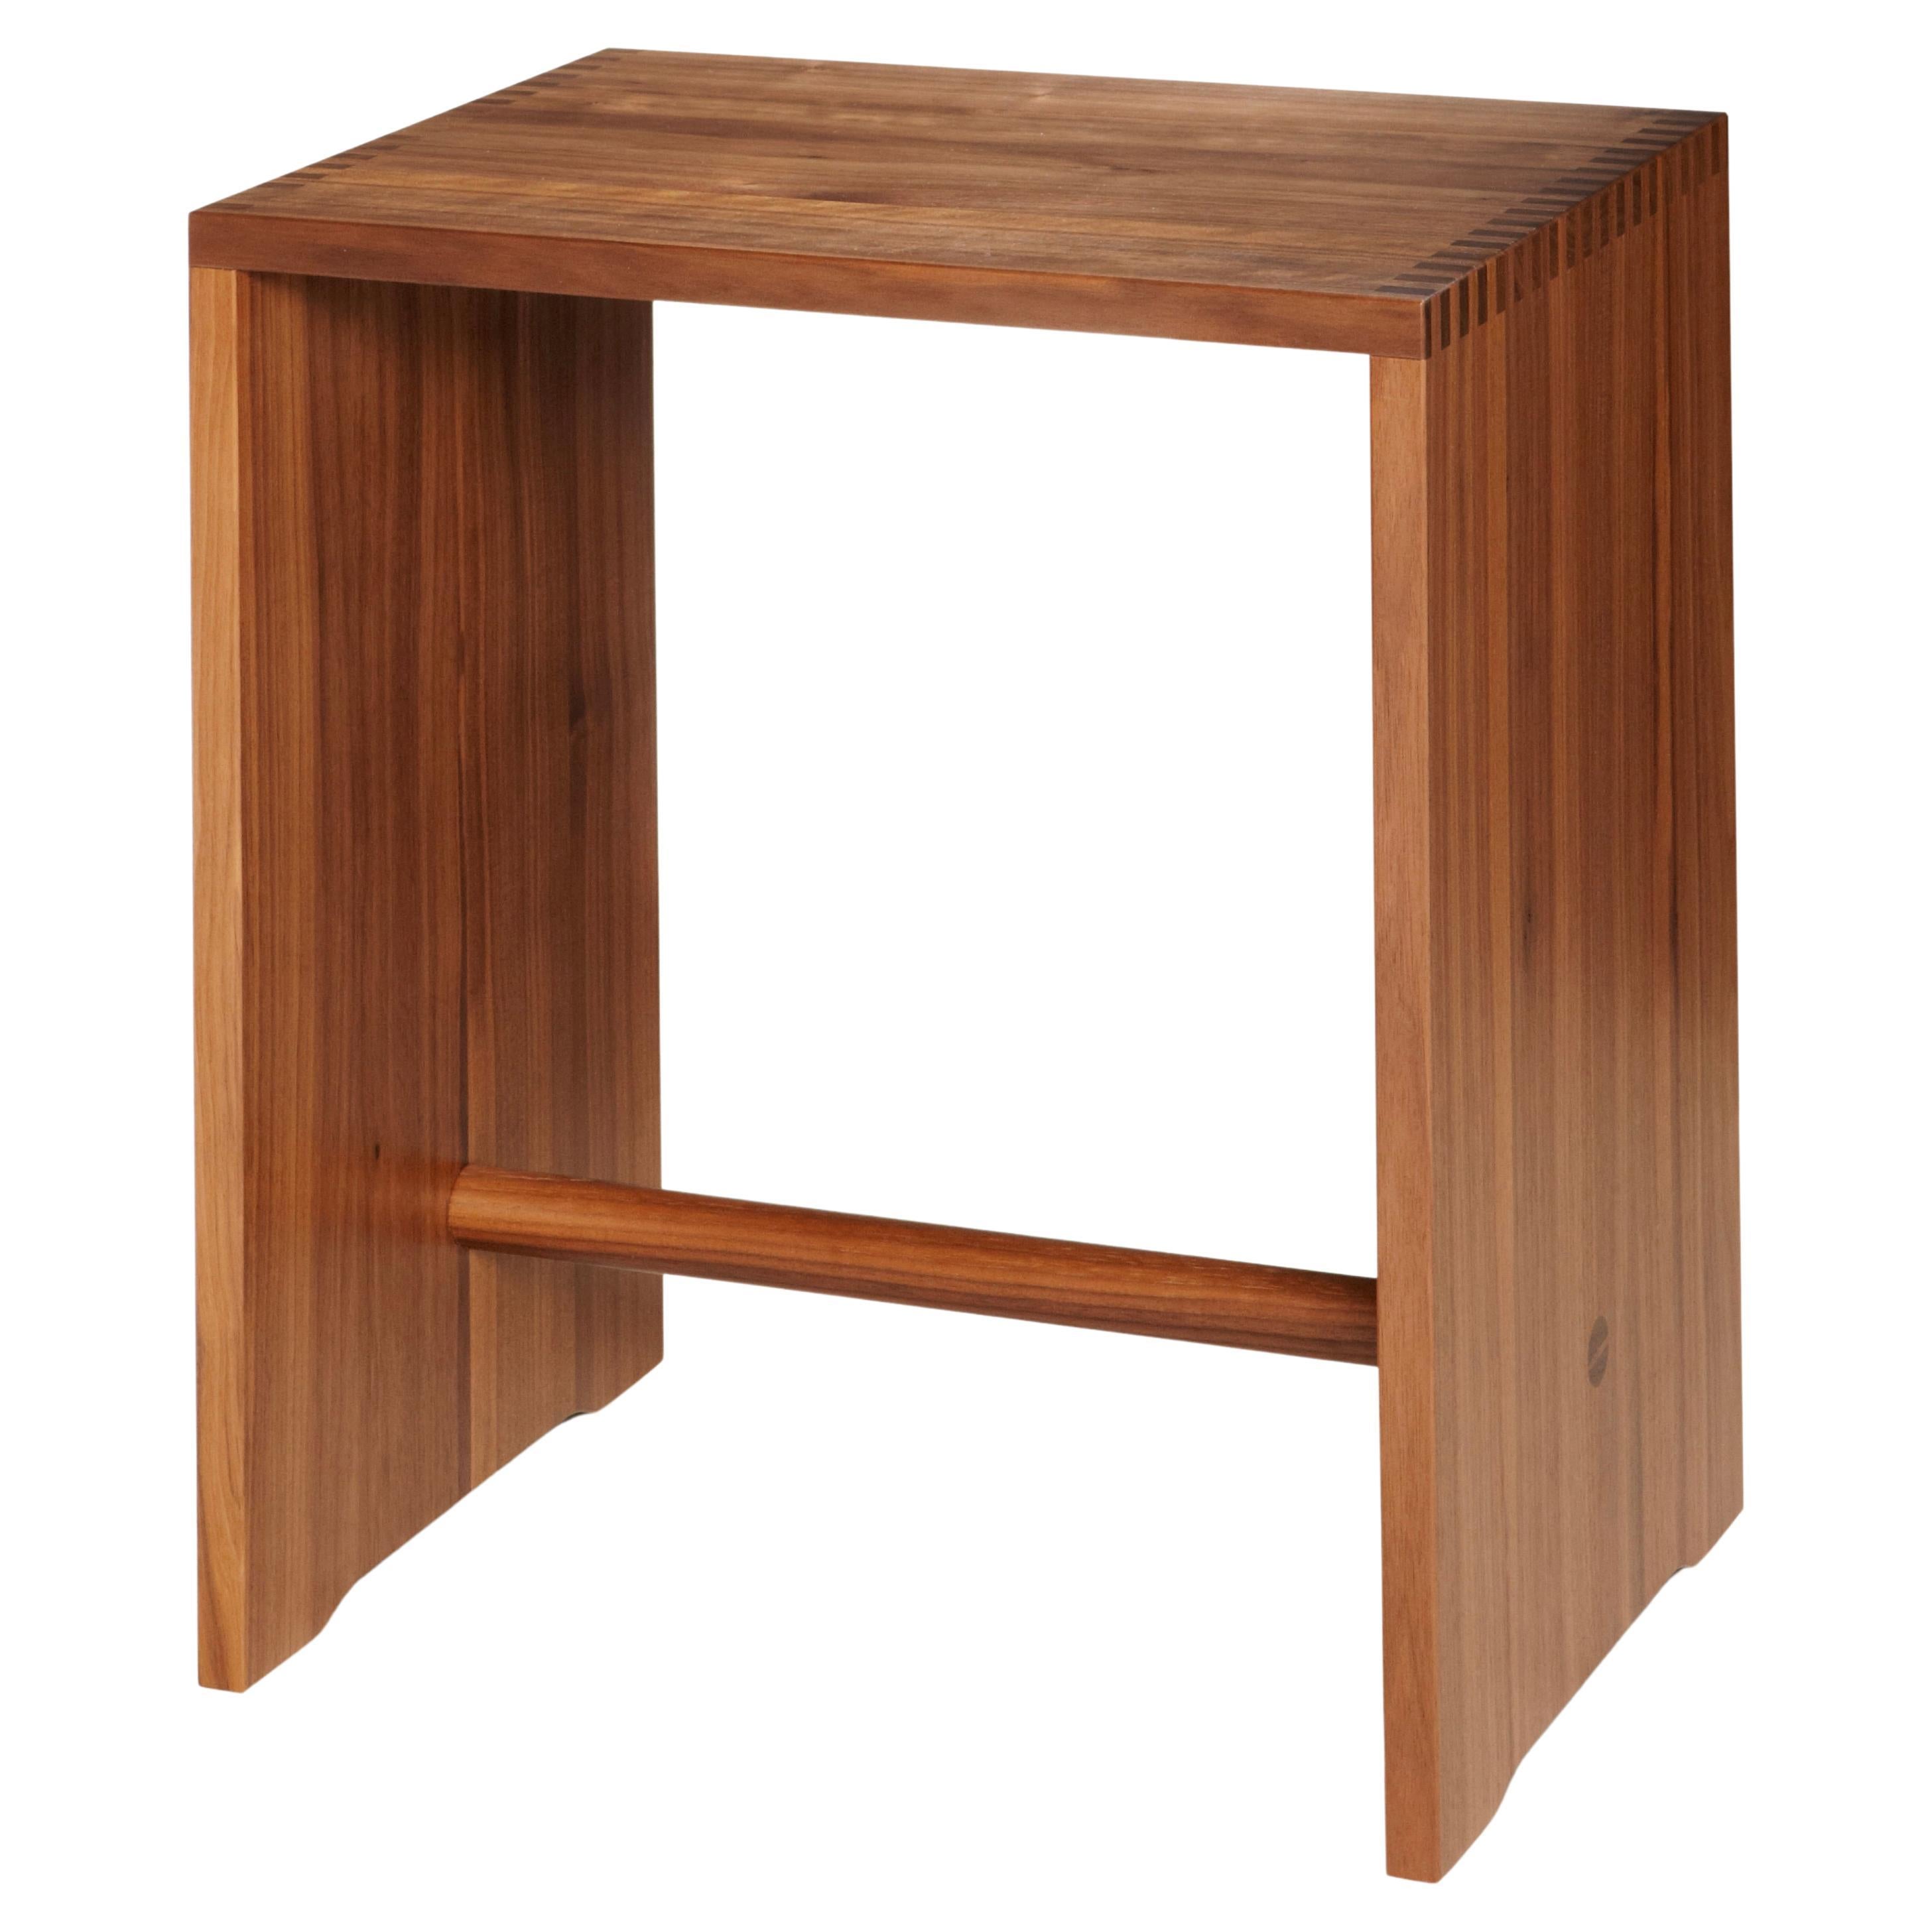 Mid Century Style ULMER HOCKER Stool by Max Bill in Notwood and Lacquer Finish